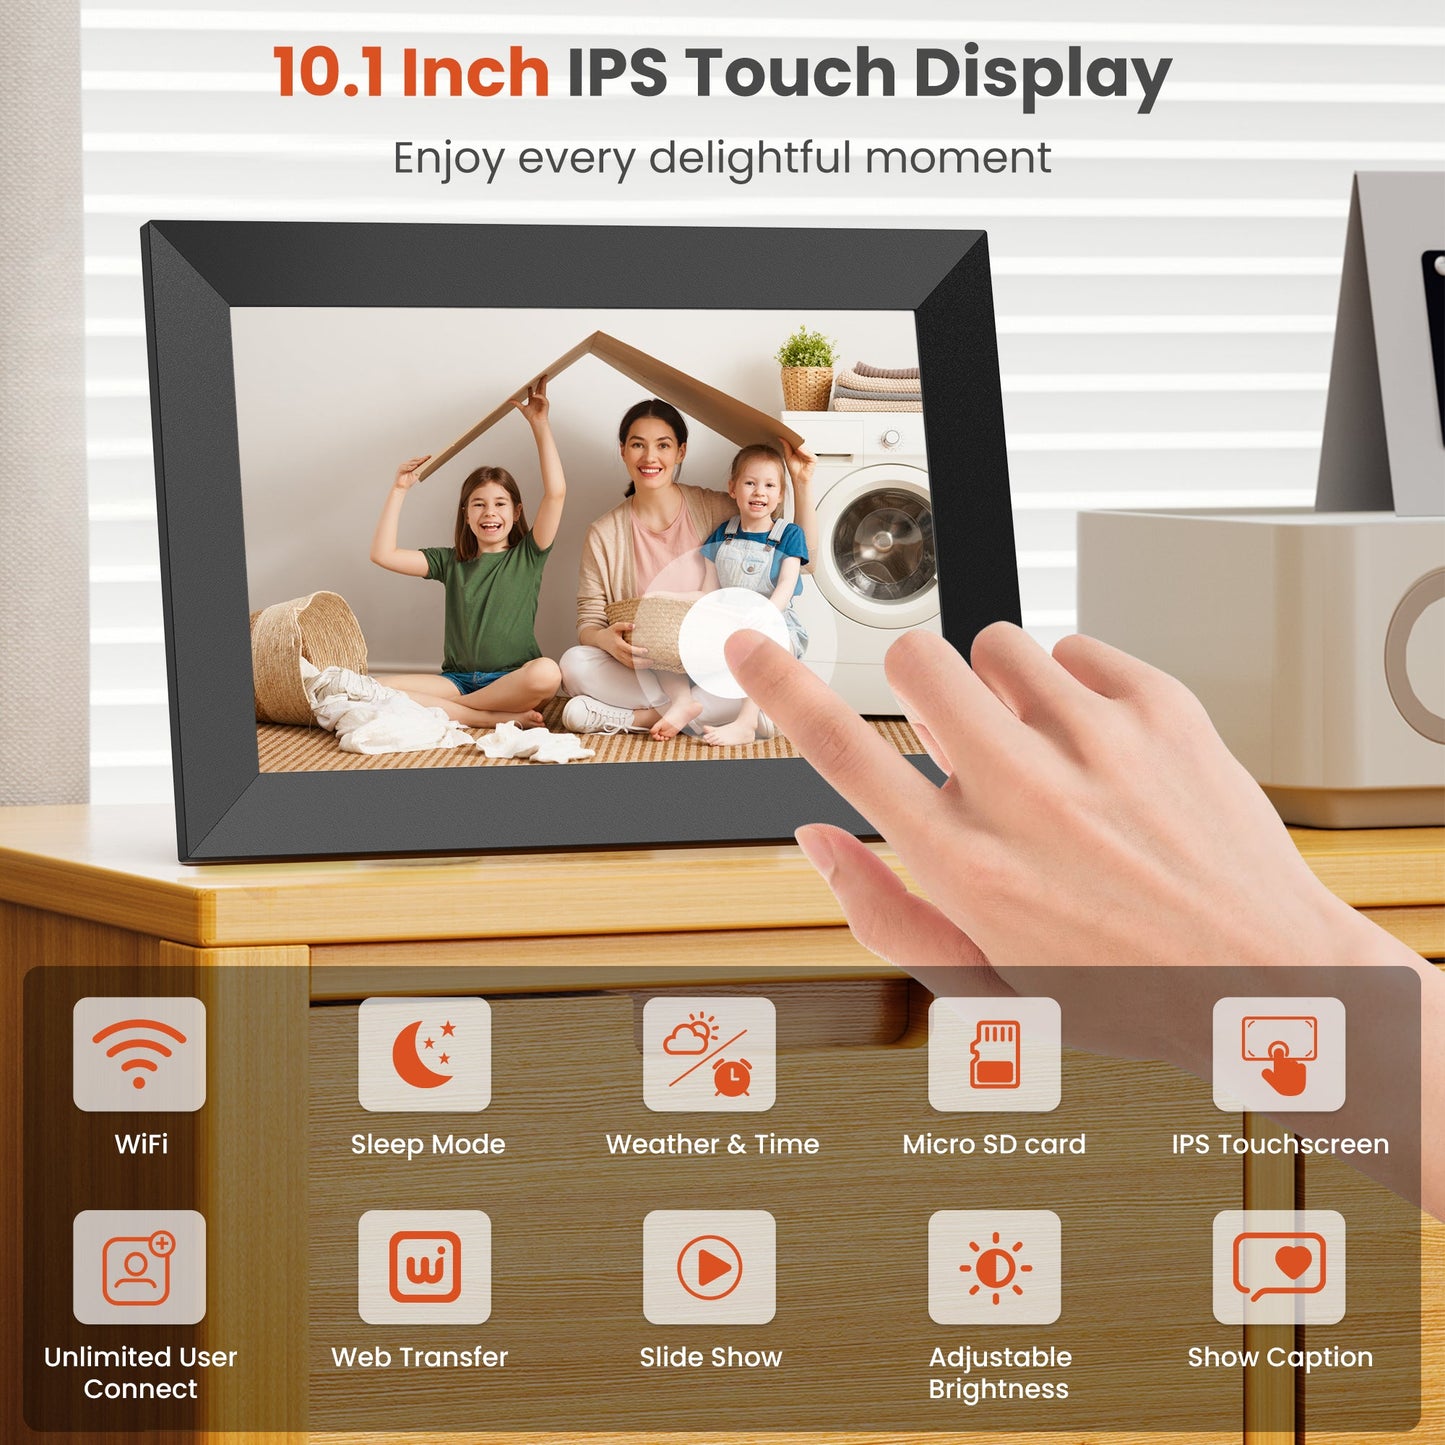 G210 WiFi Digital Picture Frame, 10.1" Smart Photo Frames Touch Screen with 32G Memory, HD Electric Picture Frame support Wall Mount, Auto-Rotate, Share Instant Photos from Anywhere, Best Gifts！